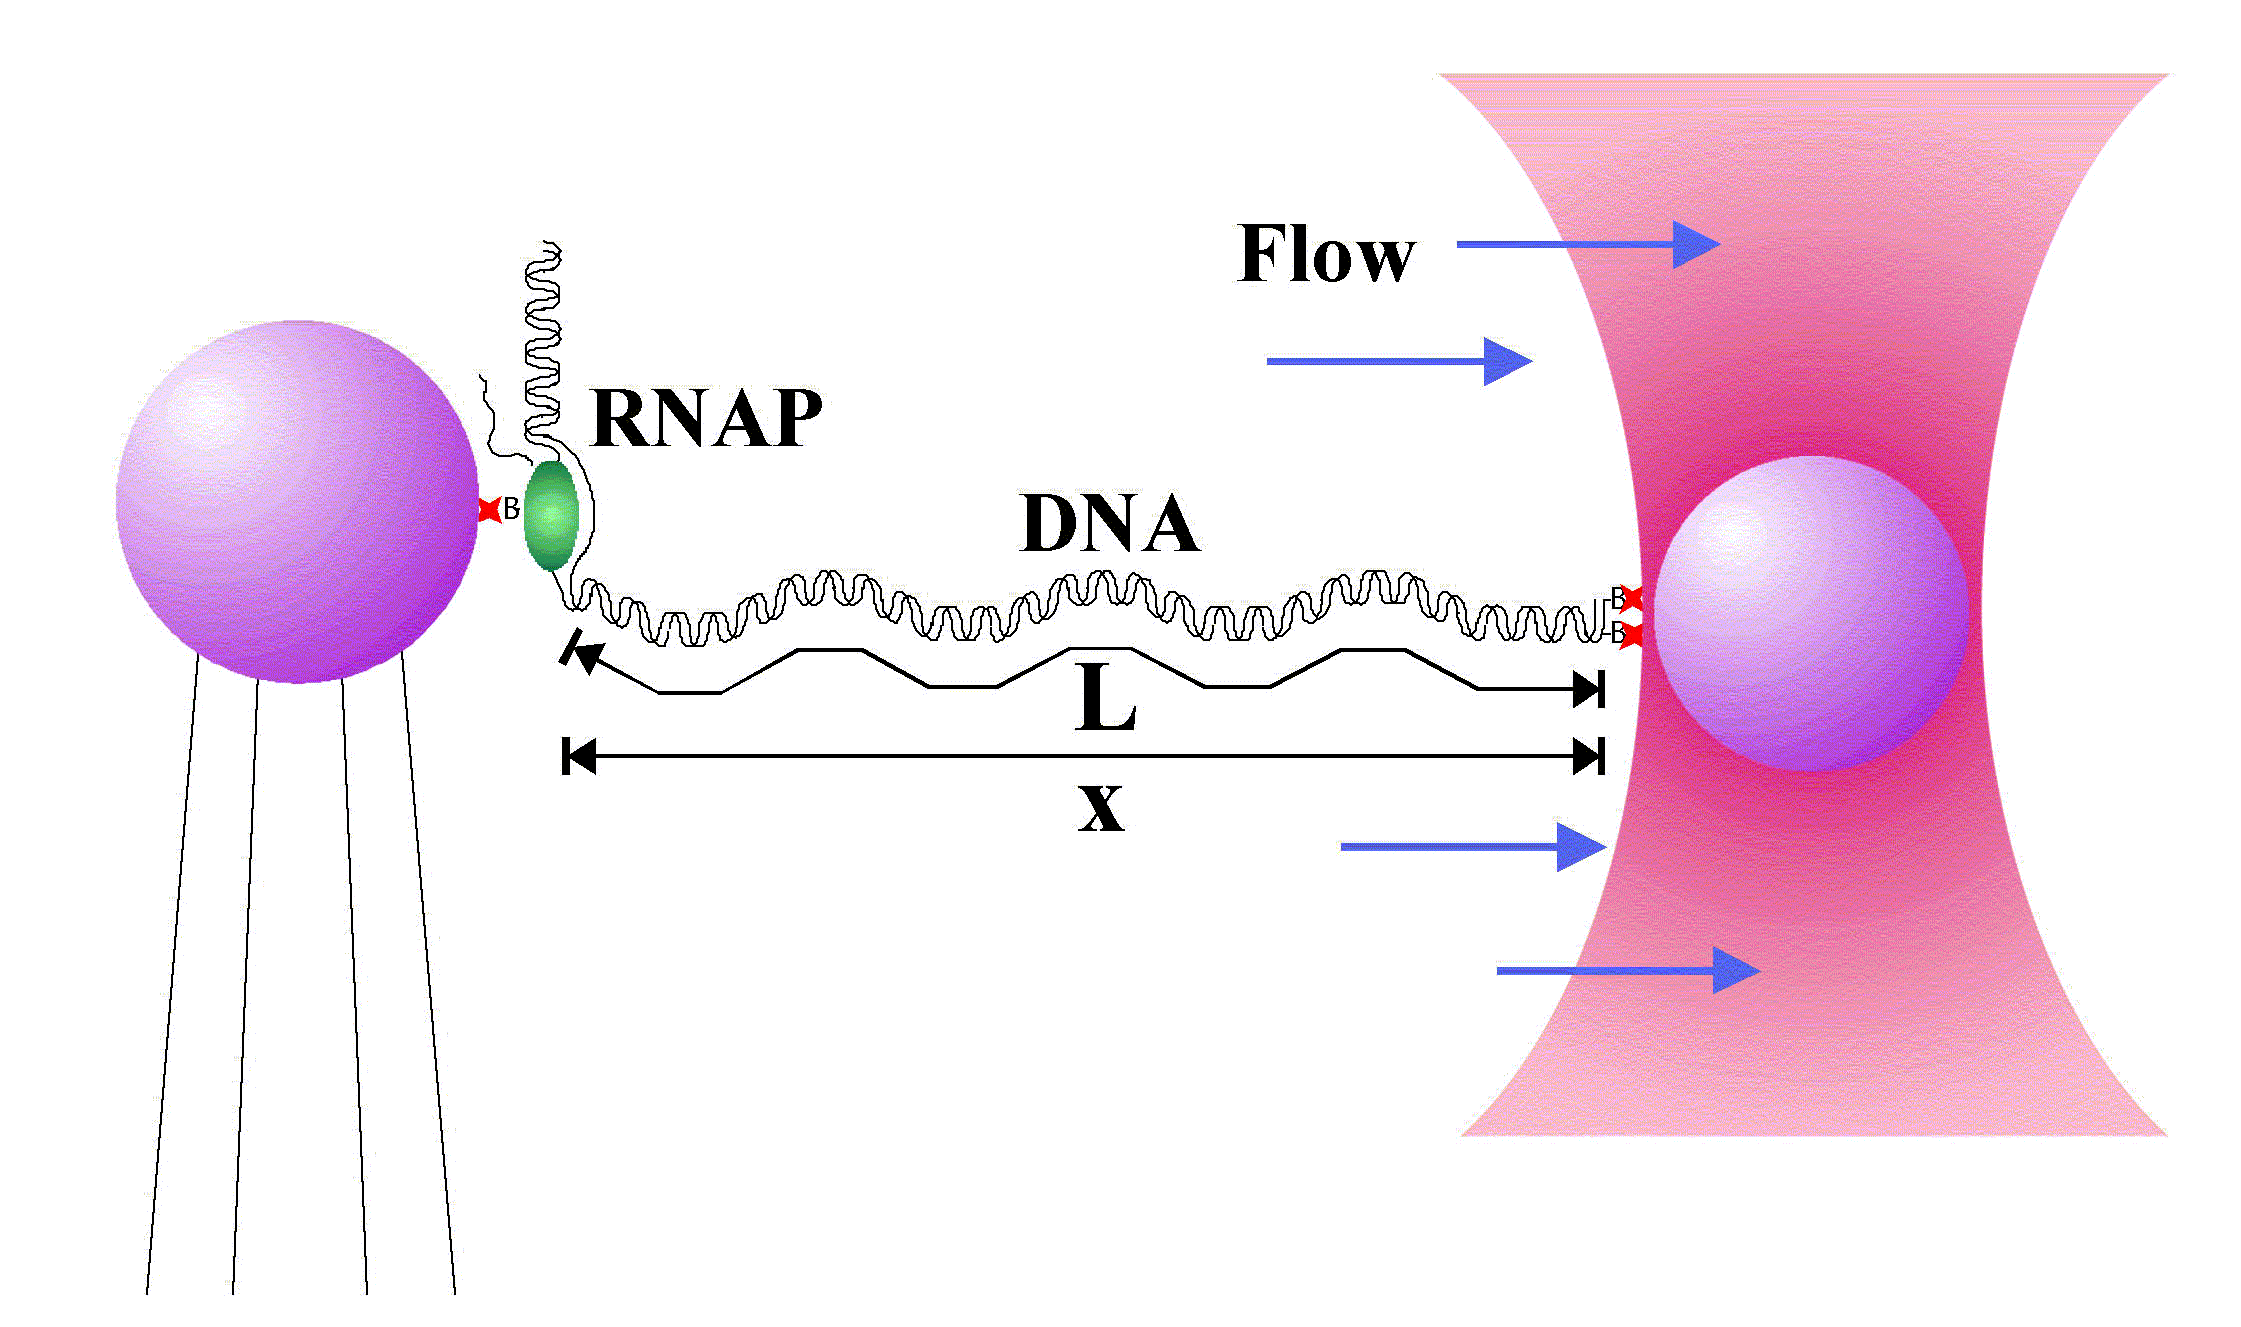 Laser Tweezers and Transcription. A transcription complex is tethered between two streptavidin-coated beads and kept in a continuous buffer flow. As a transcribing polymerase moves along the DNA, it physically pulls the two beads closer together. One bead is held in place with laser tweezers (red funnel) and the other by a pipette. The separation of the beads is measured by video microscopy and used to determine the end-to-end distance of the DNA.